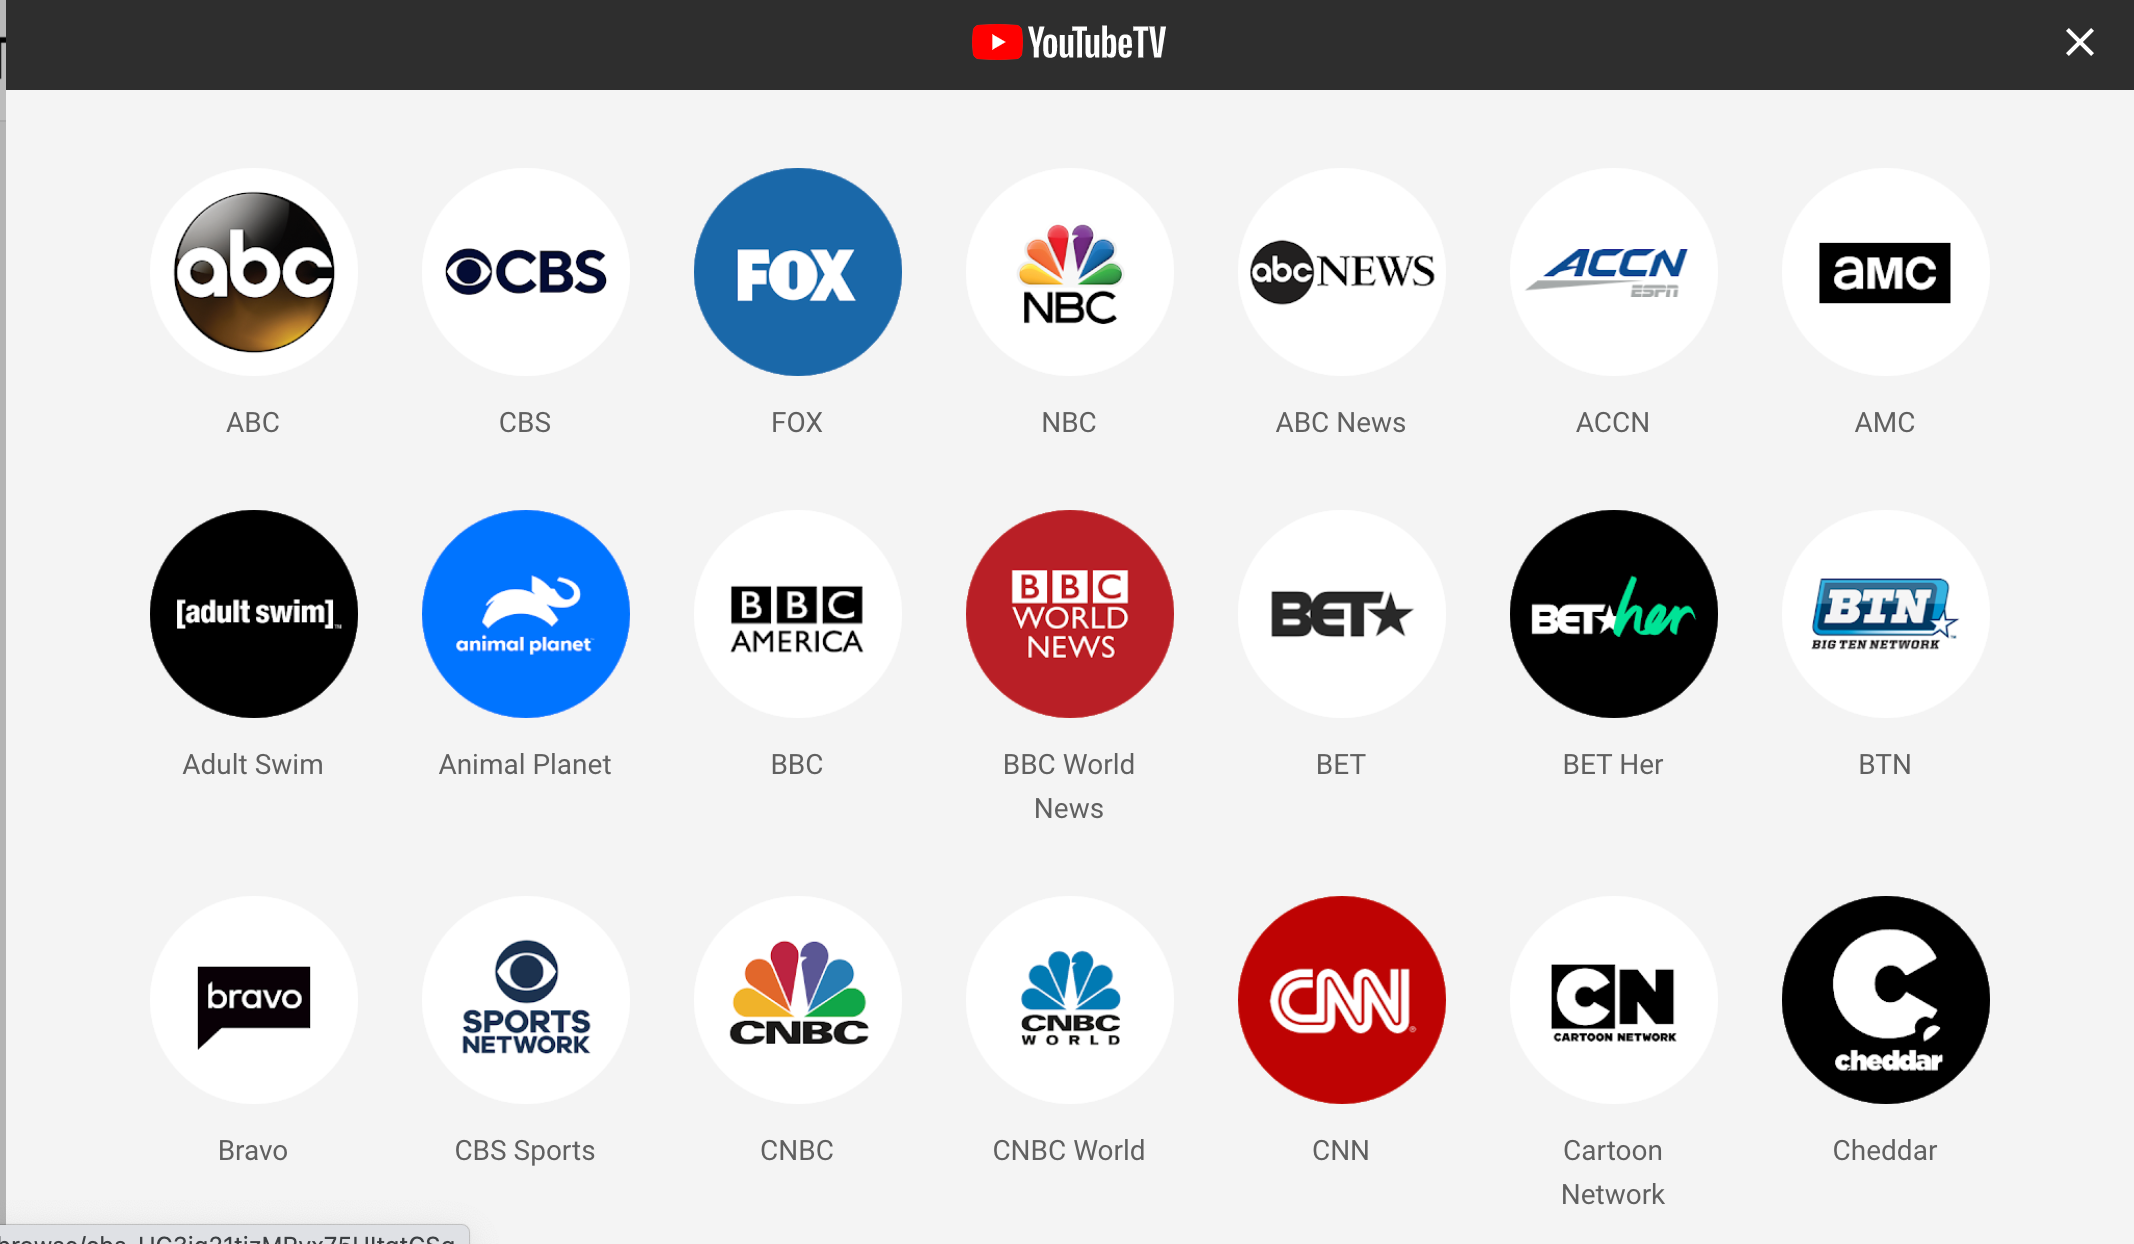 A selection of YouTube TV channels